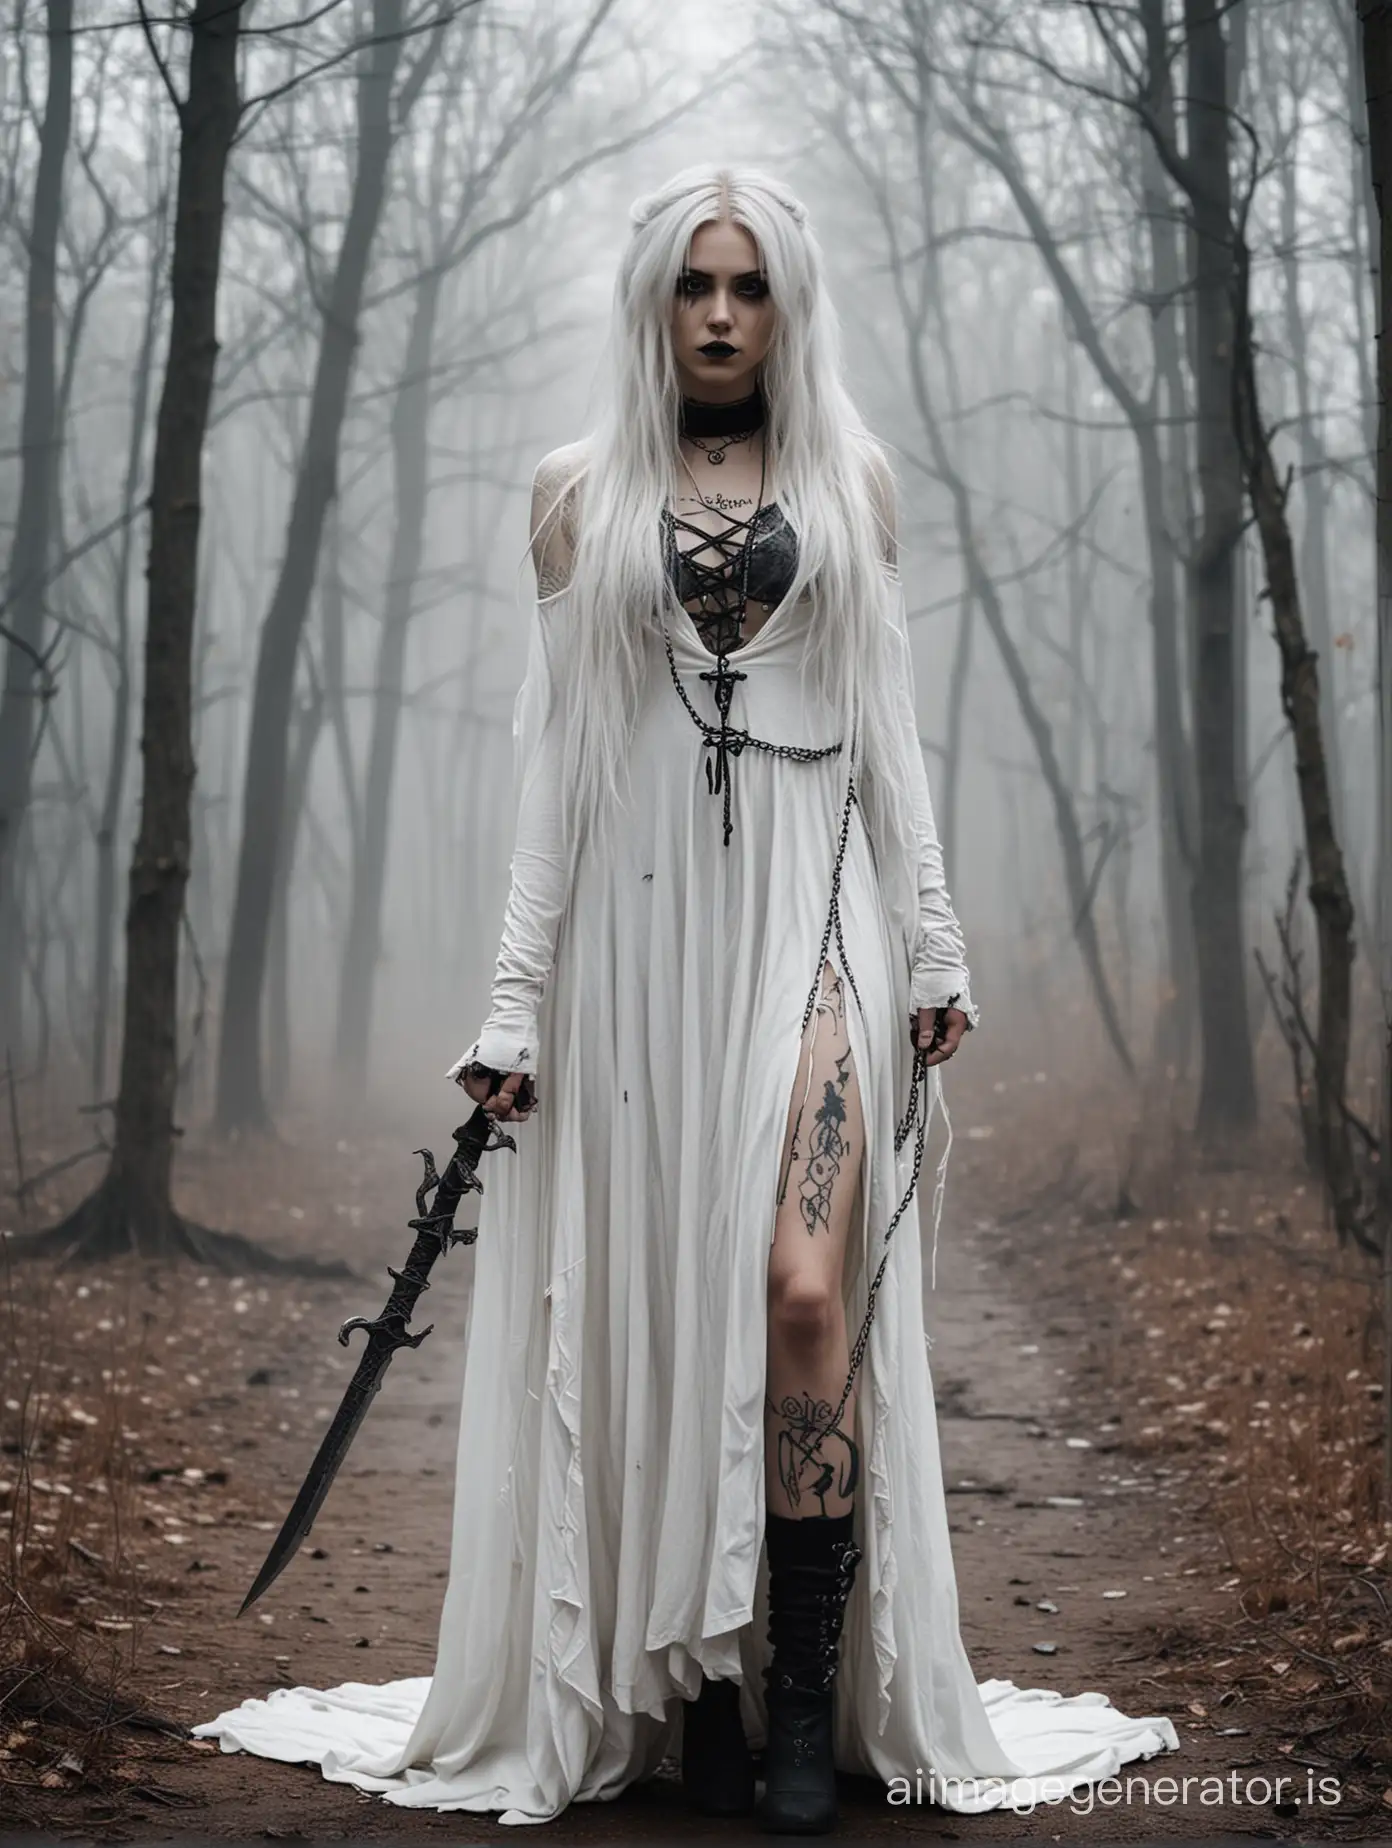 Pale-Gothic-Girl-with-Dagger-in-Eerie-Forest